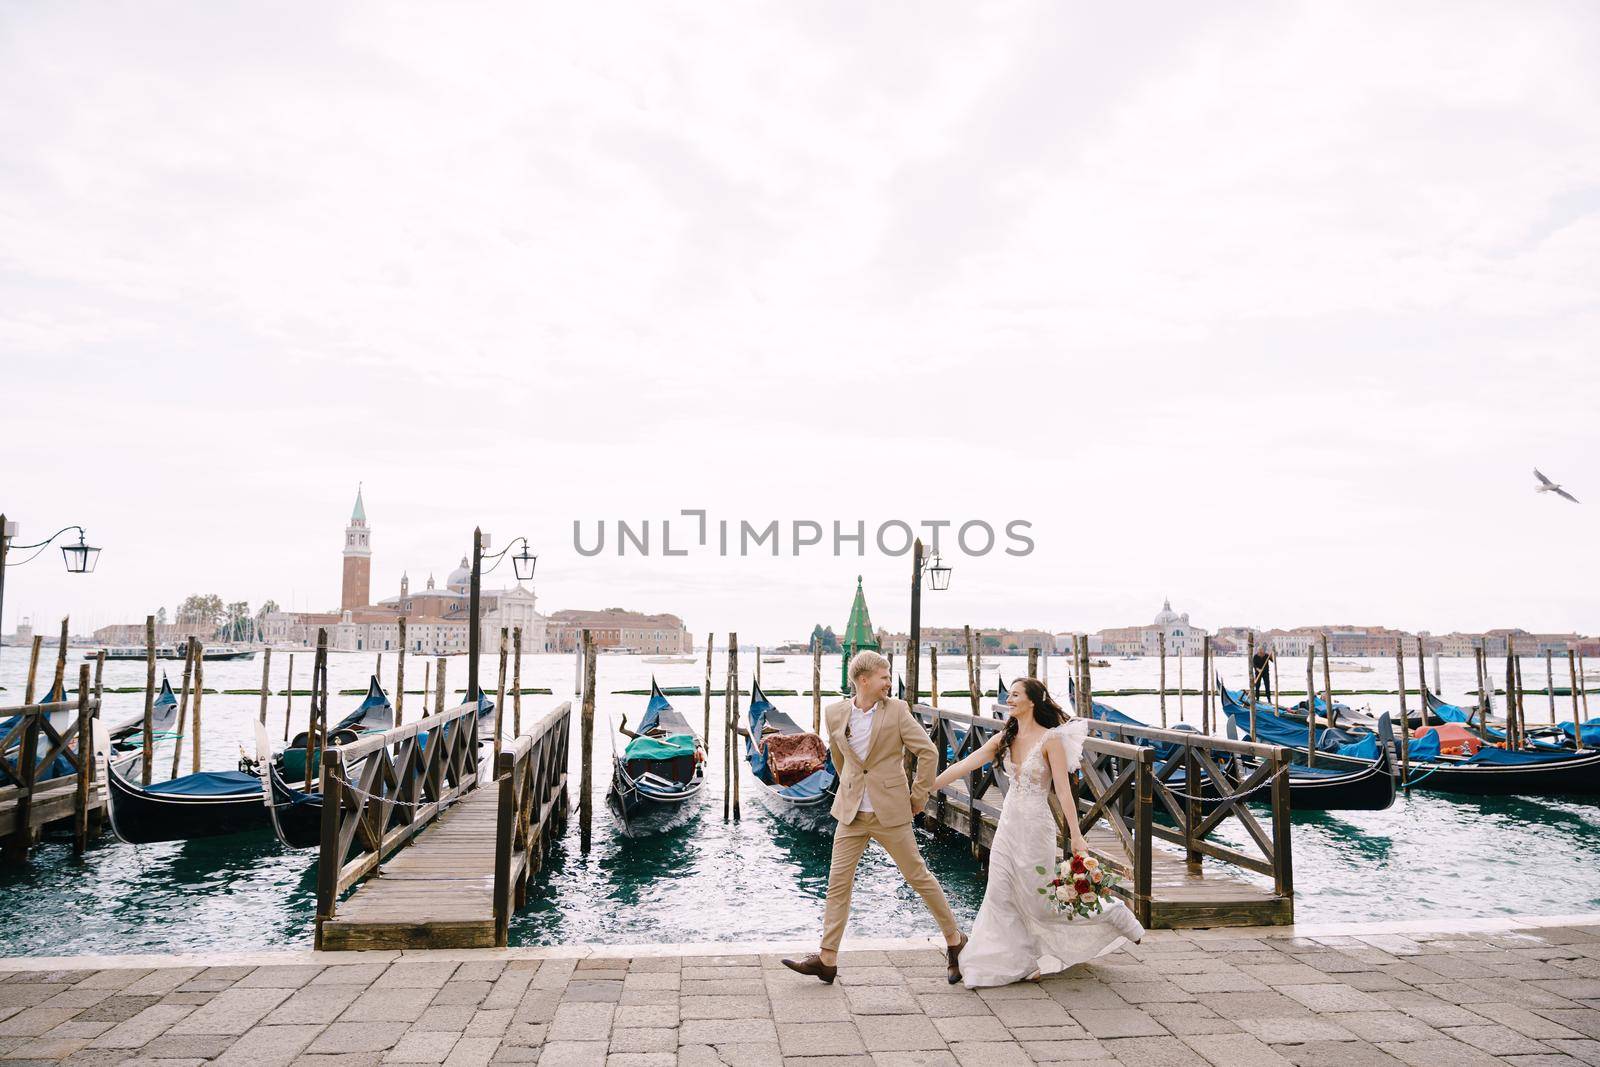 The bride and groom walk along the gondola dock holding hands in Venice, near Piazza San Marco, overlooking San Giorgio Maggiore and the sunset sky. The largest pier for gondolas in Venice, Italy.